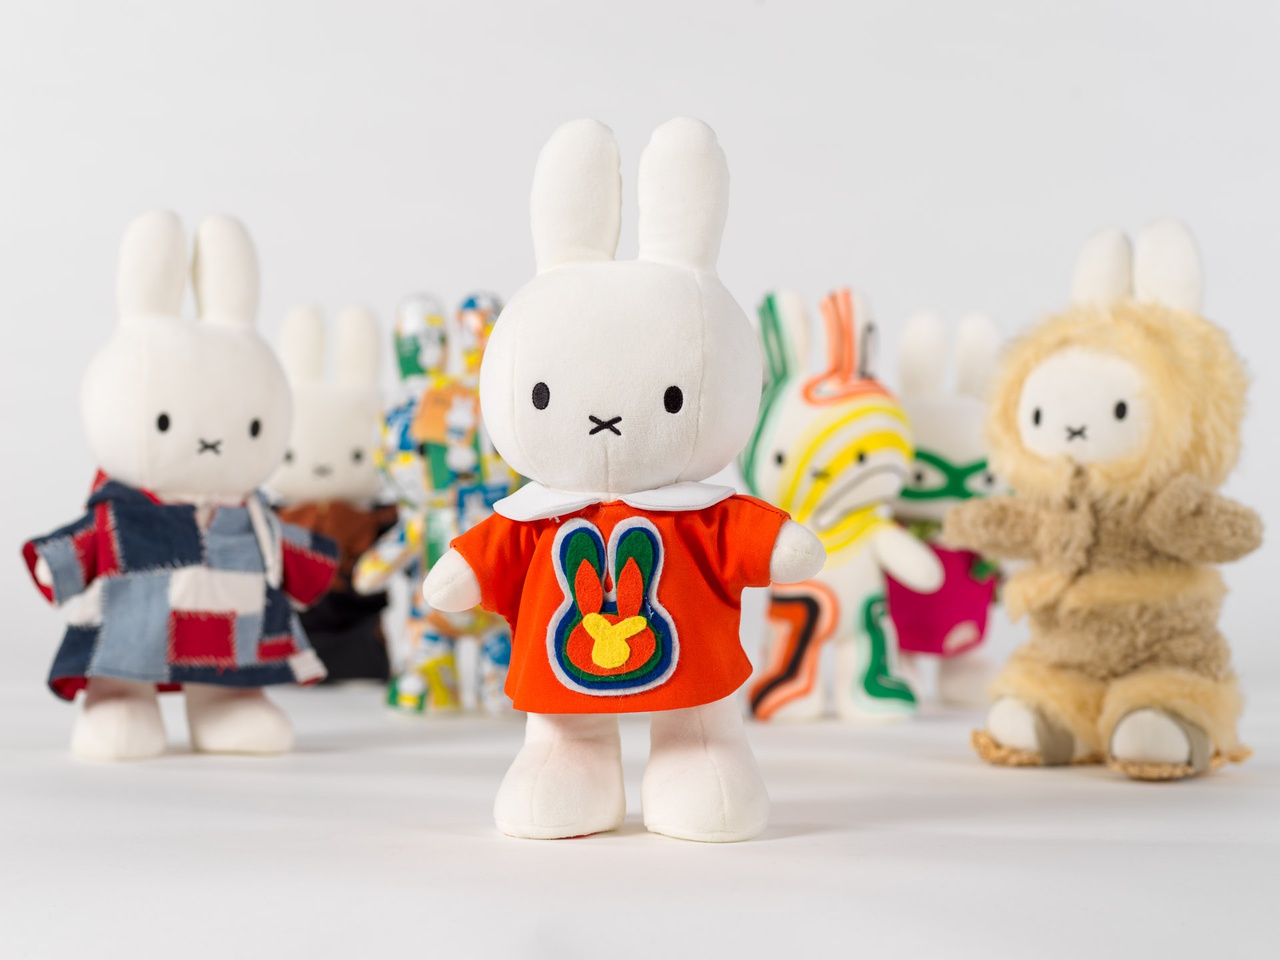 Miffy, 65 years a source of inspiration